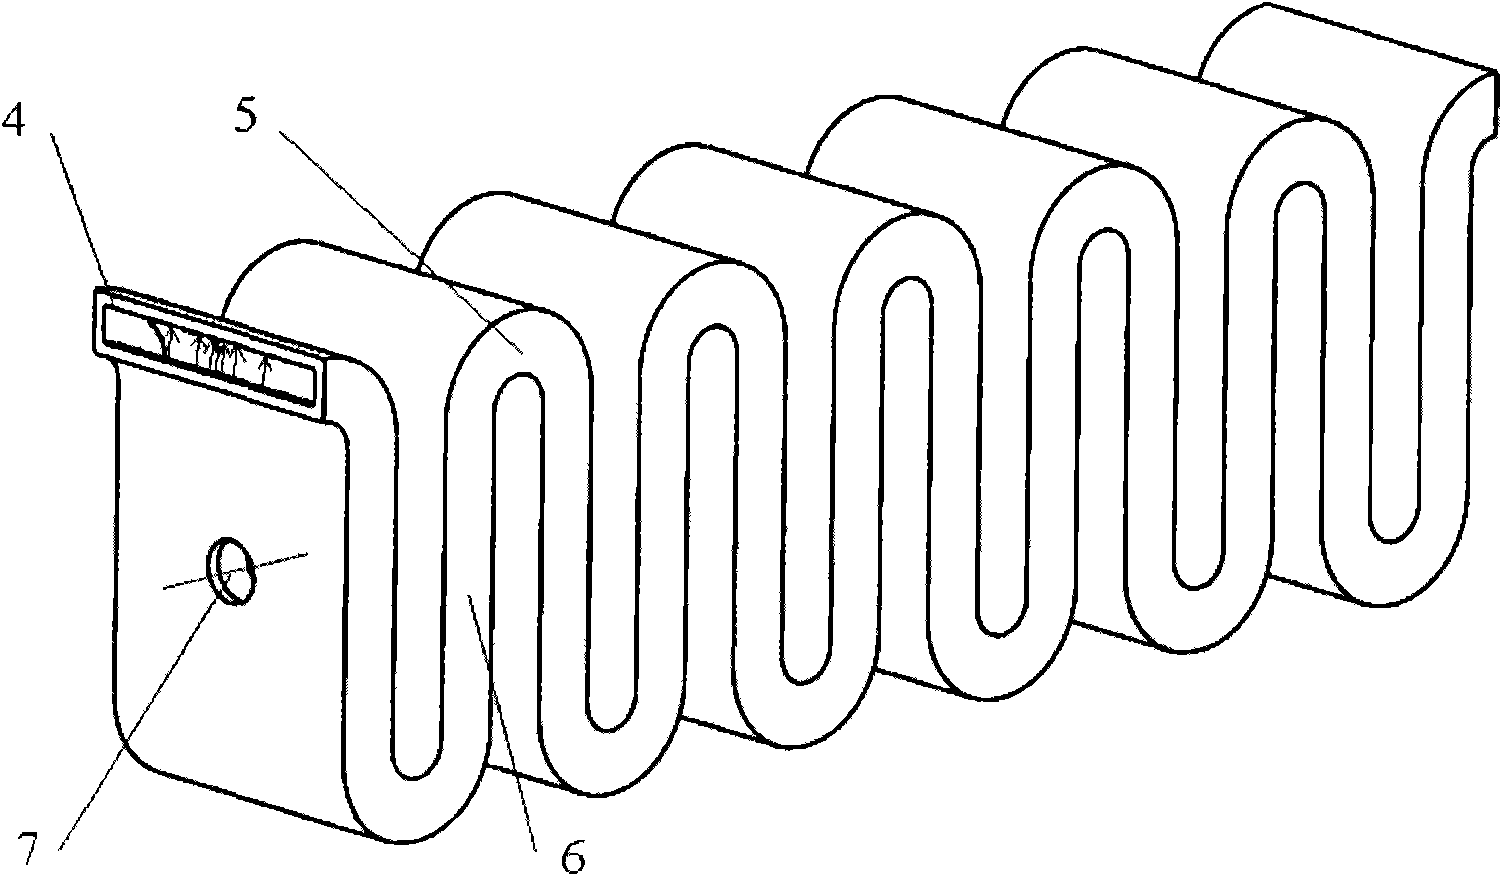 Curved channel waveguide slow-wave line